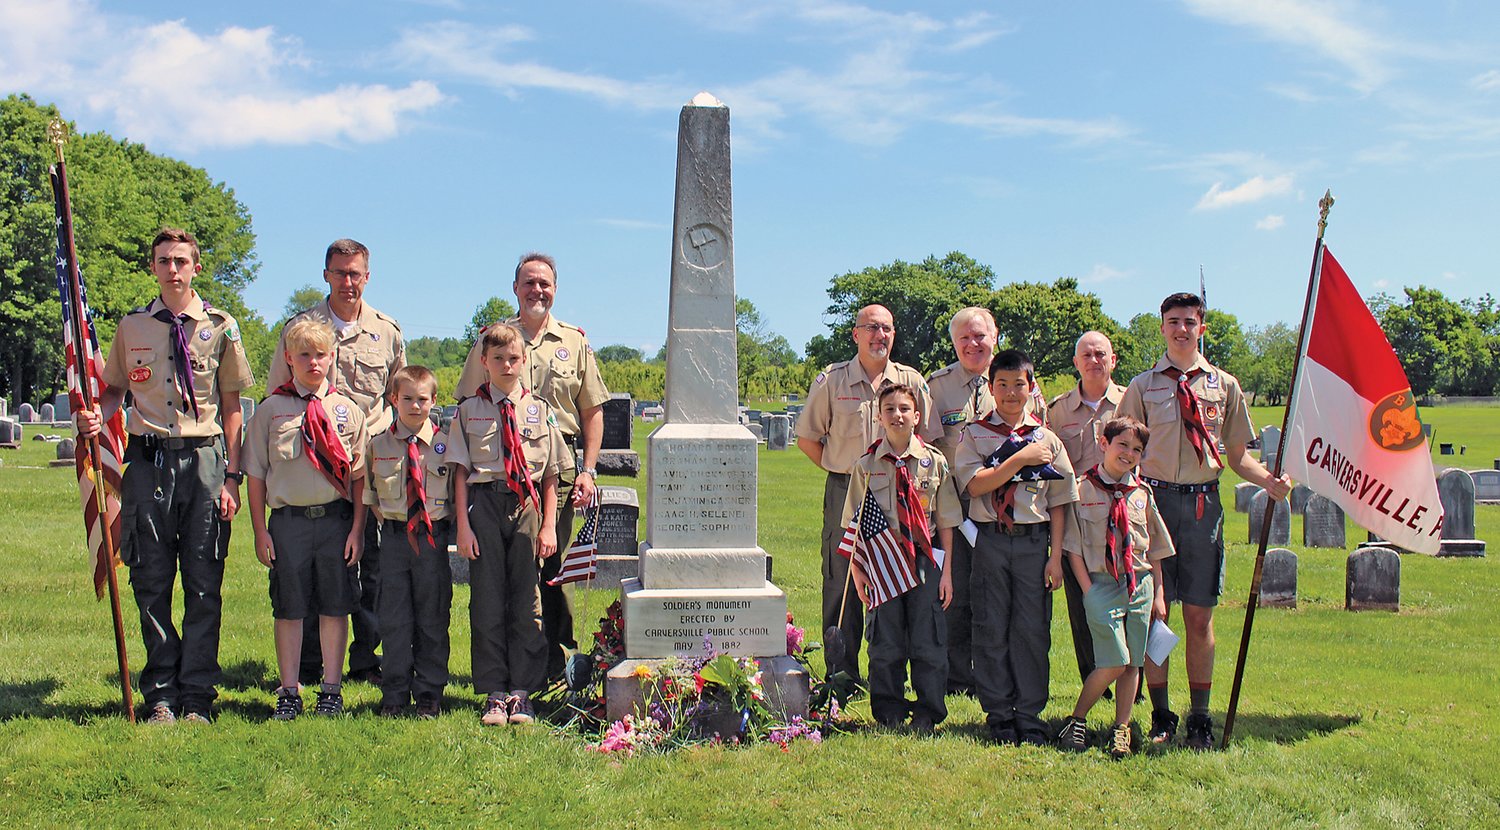 Troop 64 Boy Scouts participating in the Service of Remembrance included, front row from left, Rex Fowler, Zachary McNabb, Kenny Johnson, Jacob Konrad, Brighton Curcio, Ethan Broekema, Gus Clancy and Christian Wolf. Leaders participating included, back row from left, Wayne Fowler, Jeff Wolf, Juan Bravo, Ted Nichols (scoutmaster, Boy Scout Troop 64, Carversville)  and Derek Konrad.